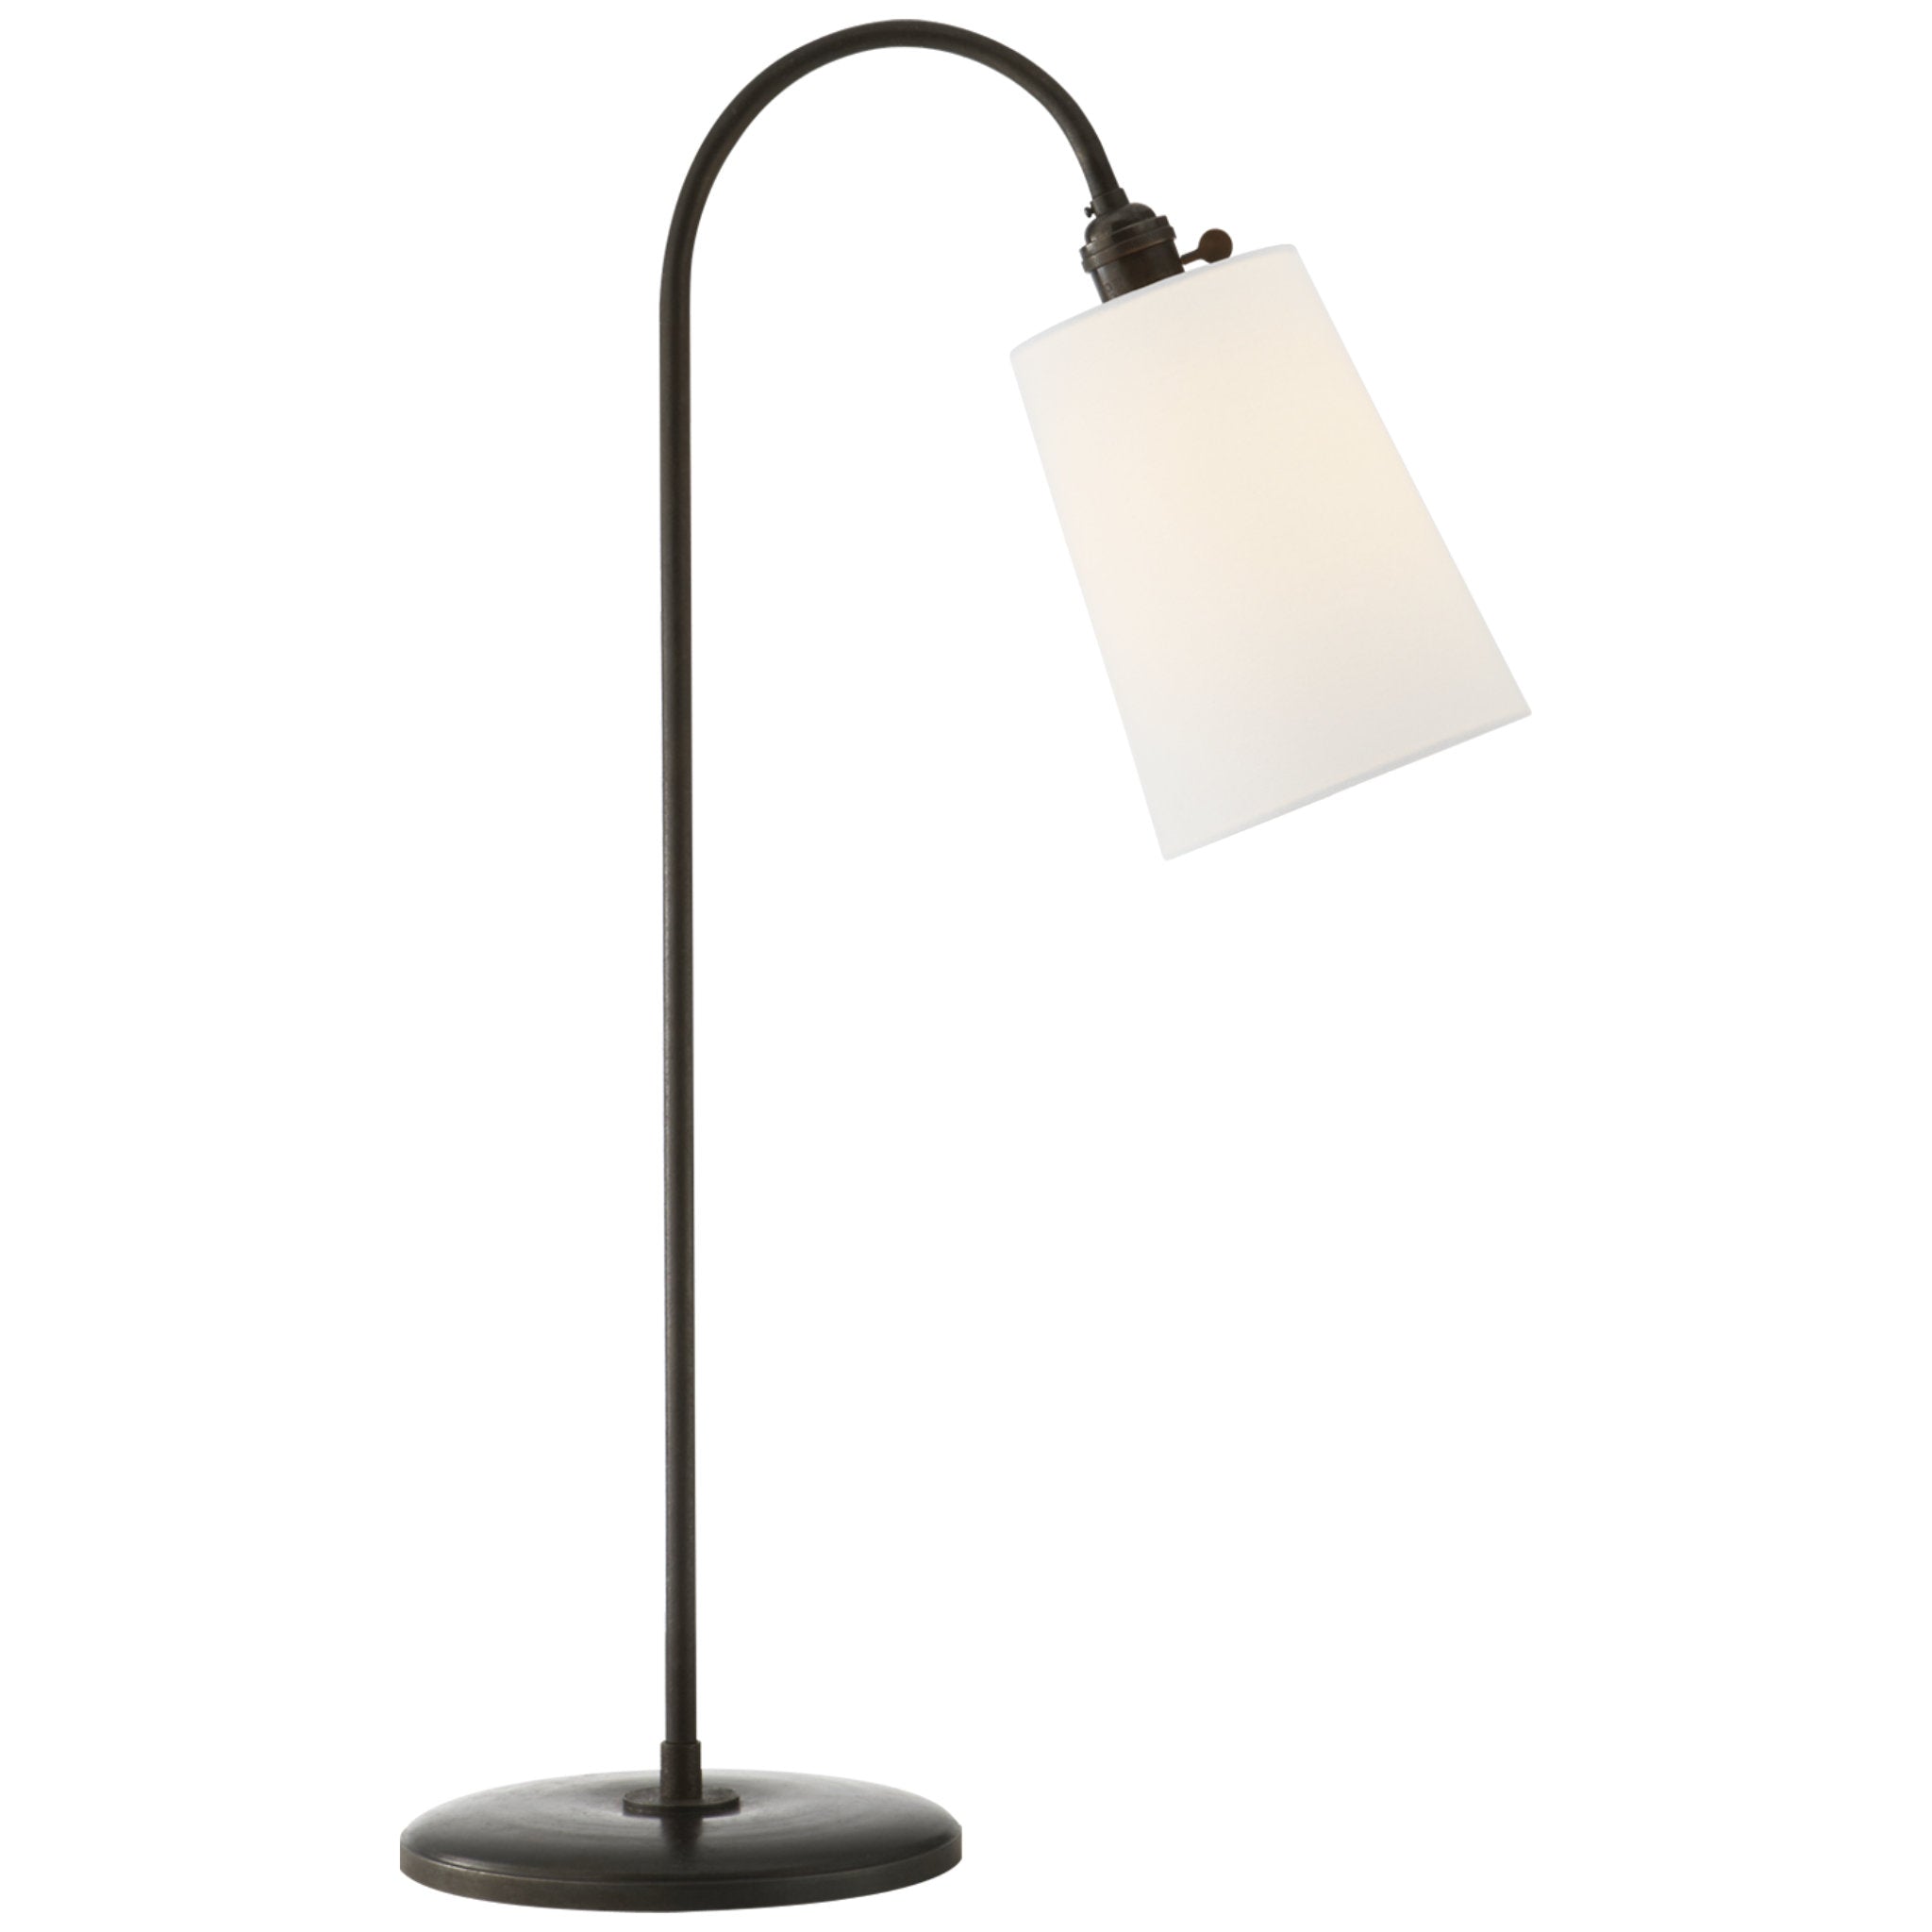 Thomas O'Brien Mia Table Lamp in Aged Iron with Linen Shade